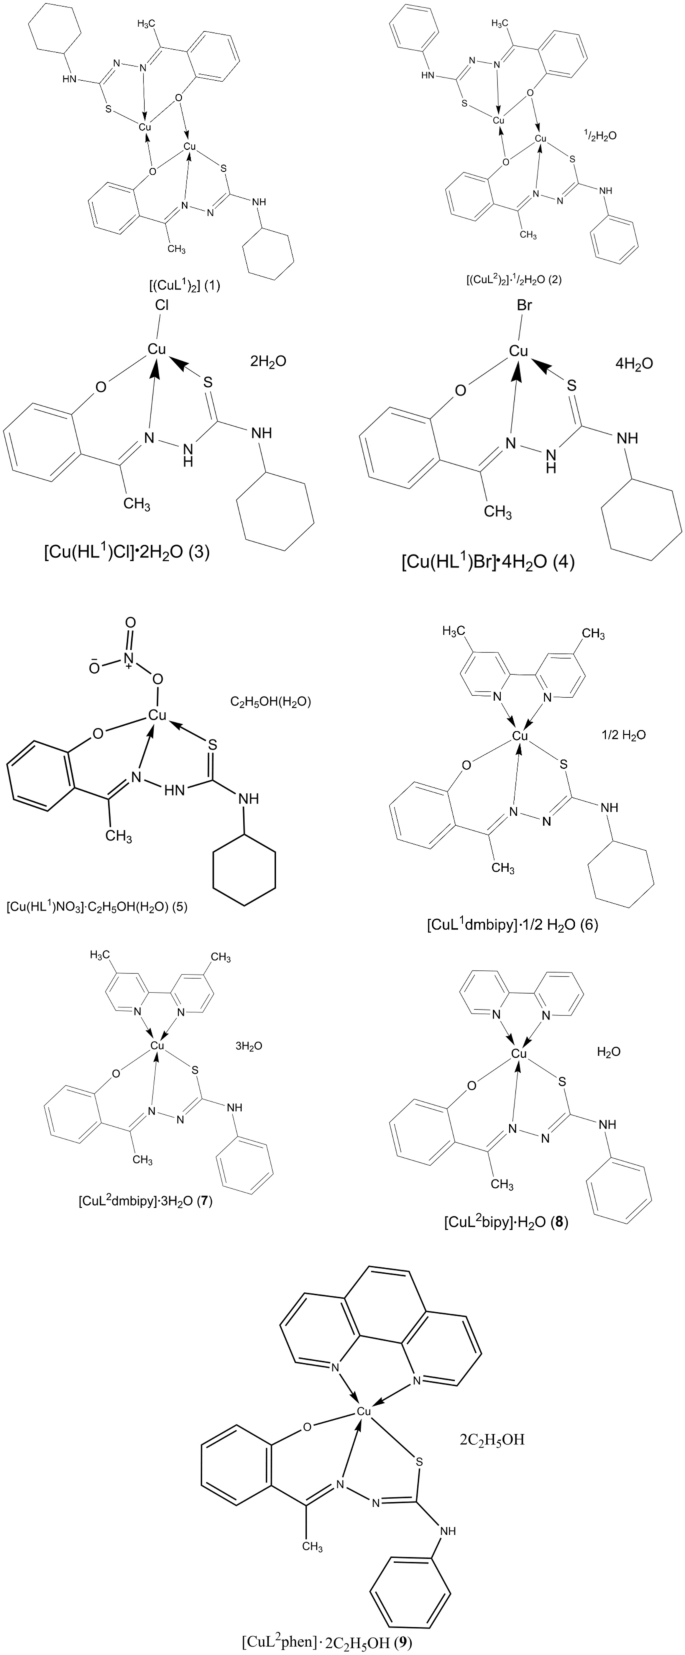 Structural And Spectral Characterization Of Cu Ii Complexes Of N 4 Substituted Thiosemicarbazones Derived From 2 Hydroxyacetophenone Crystal Structure Of A Dinuclear Cu Ii Complex Springerlink